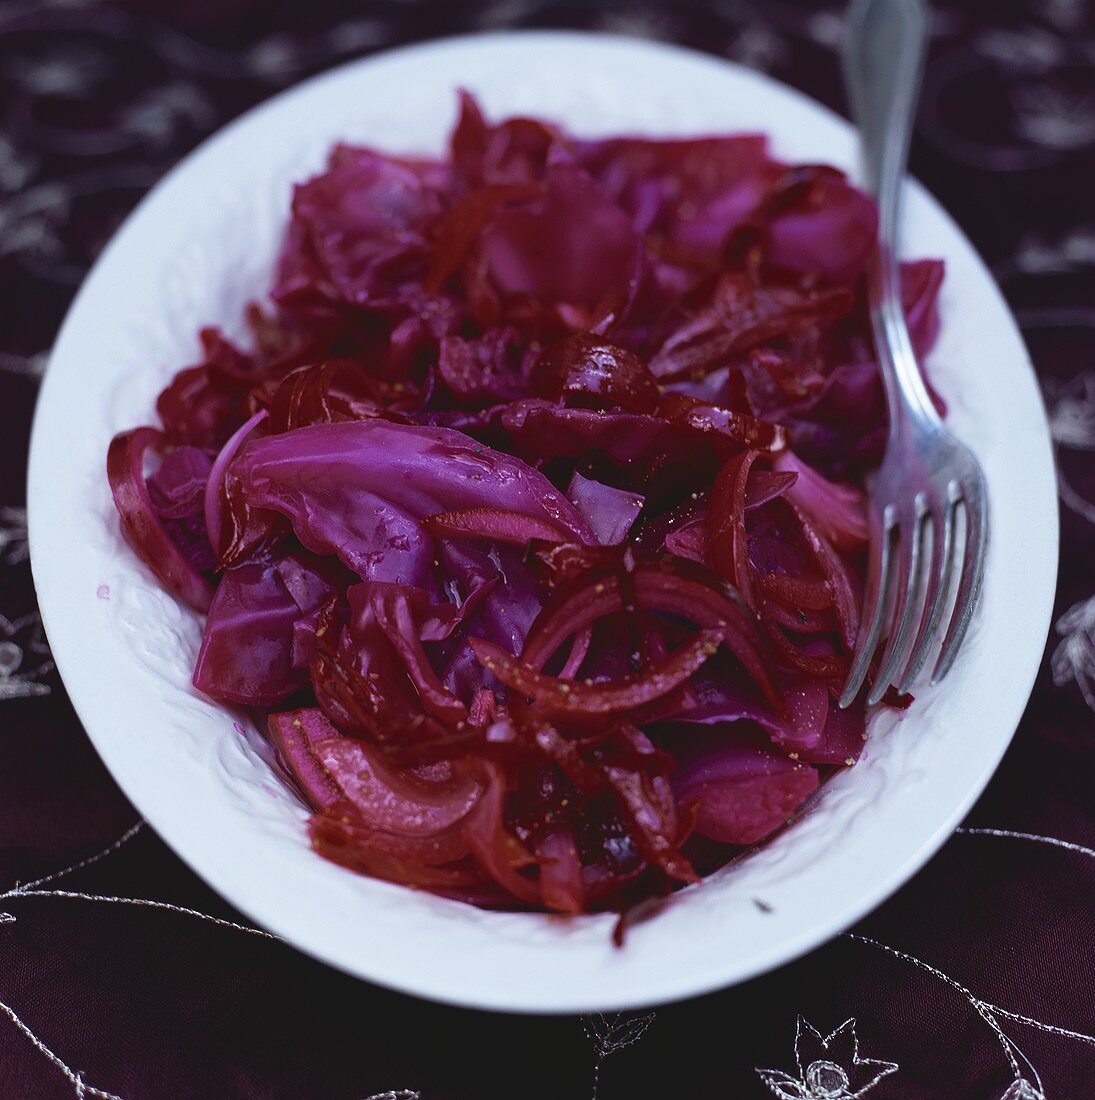 Red cabbage with apples and onions in cider